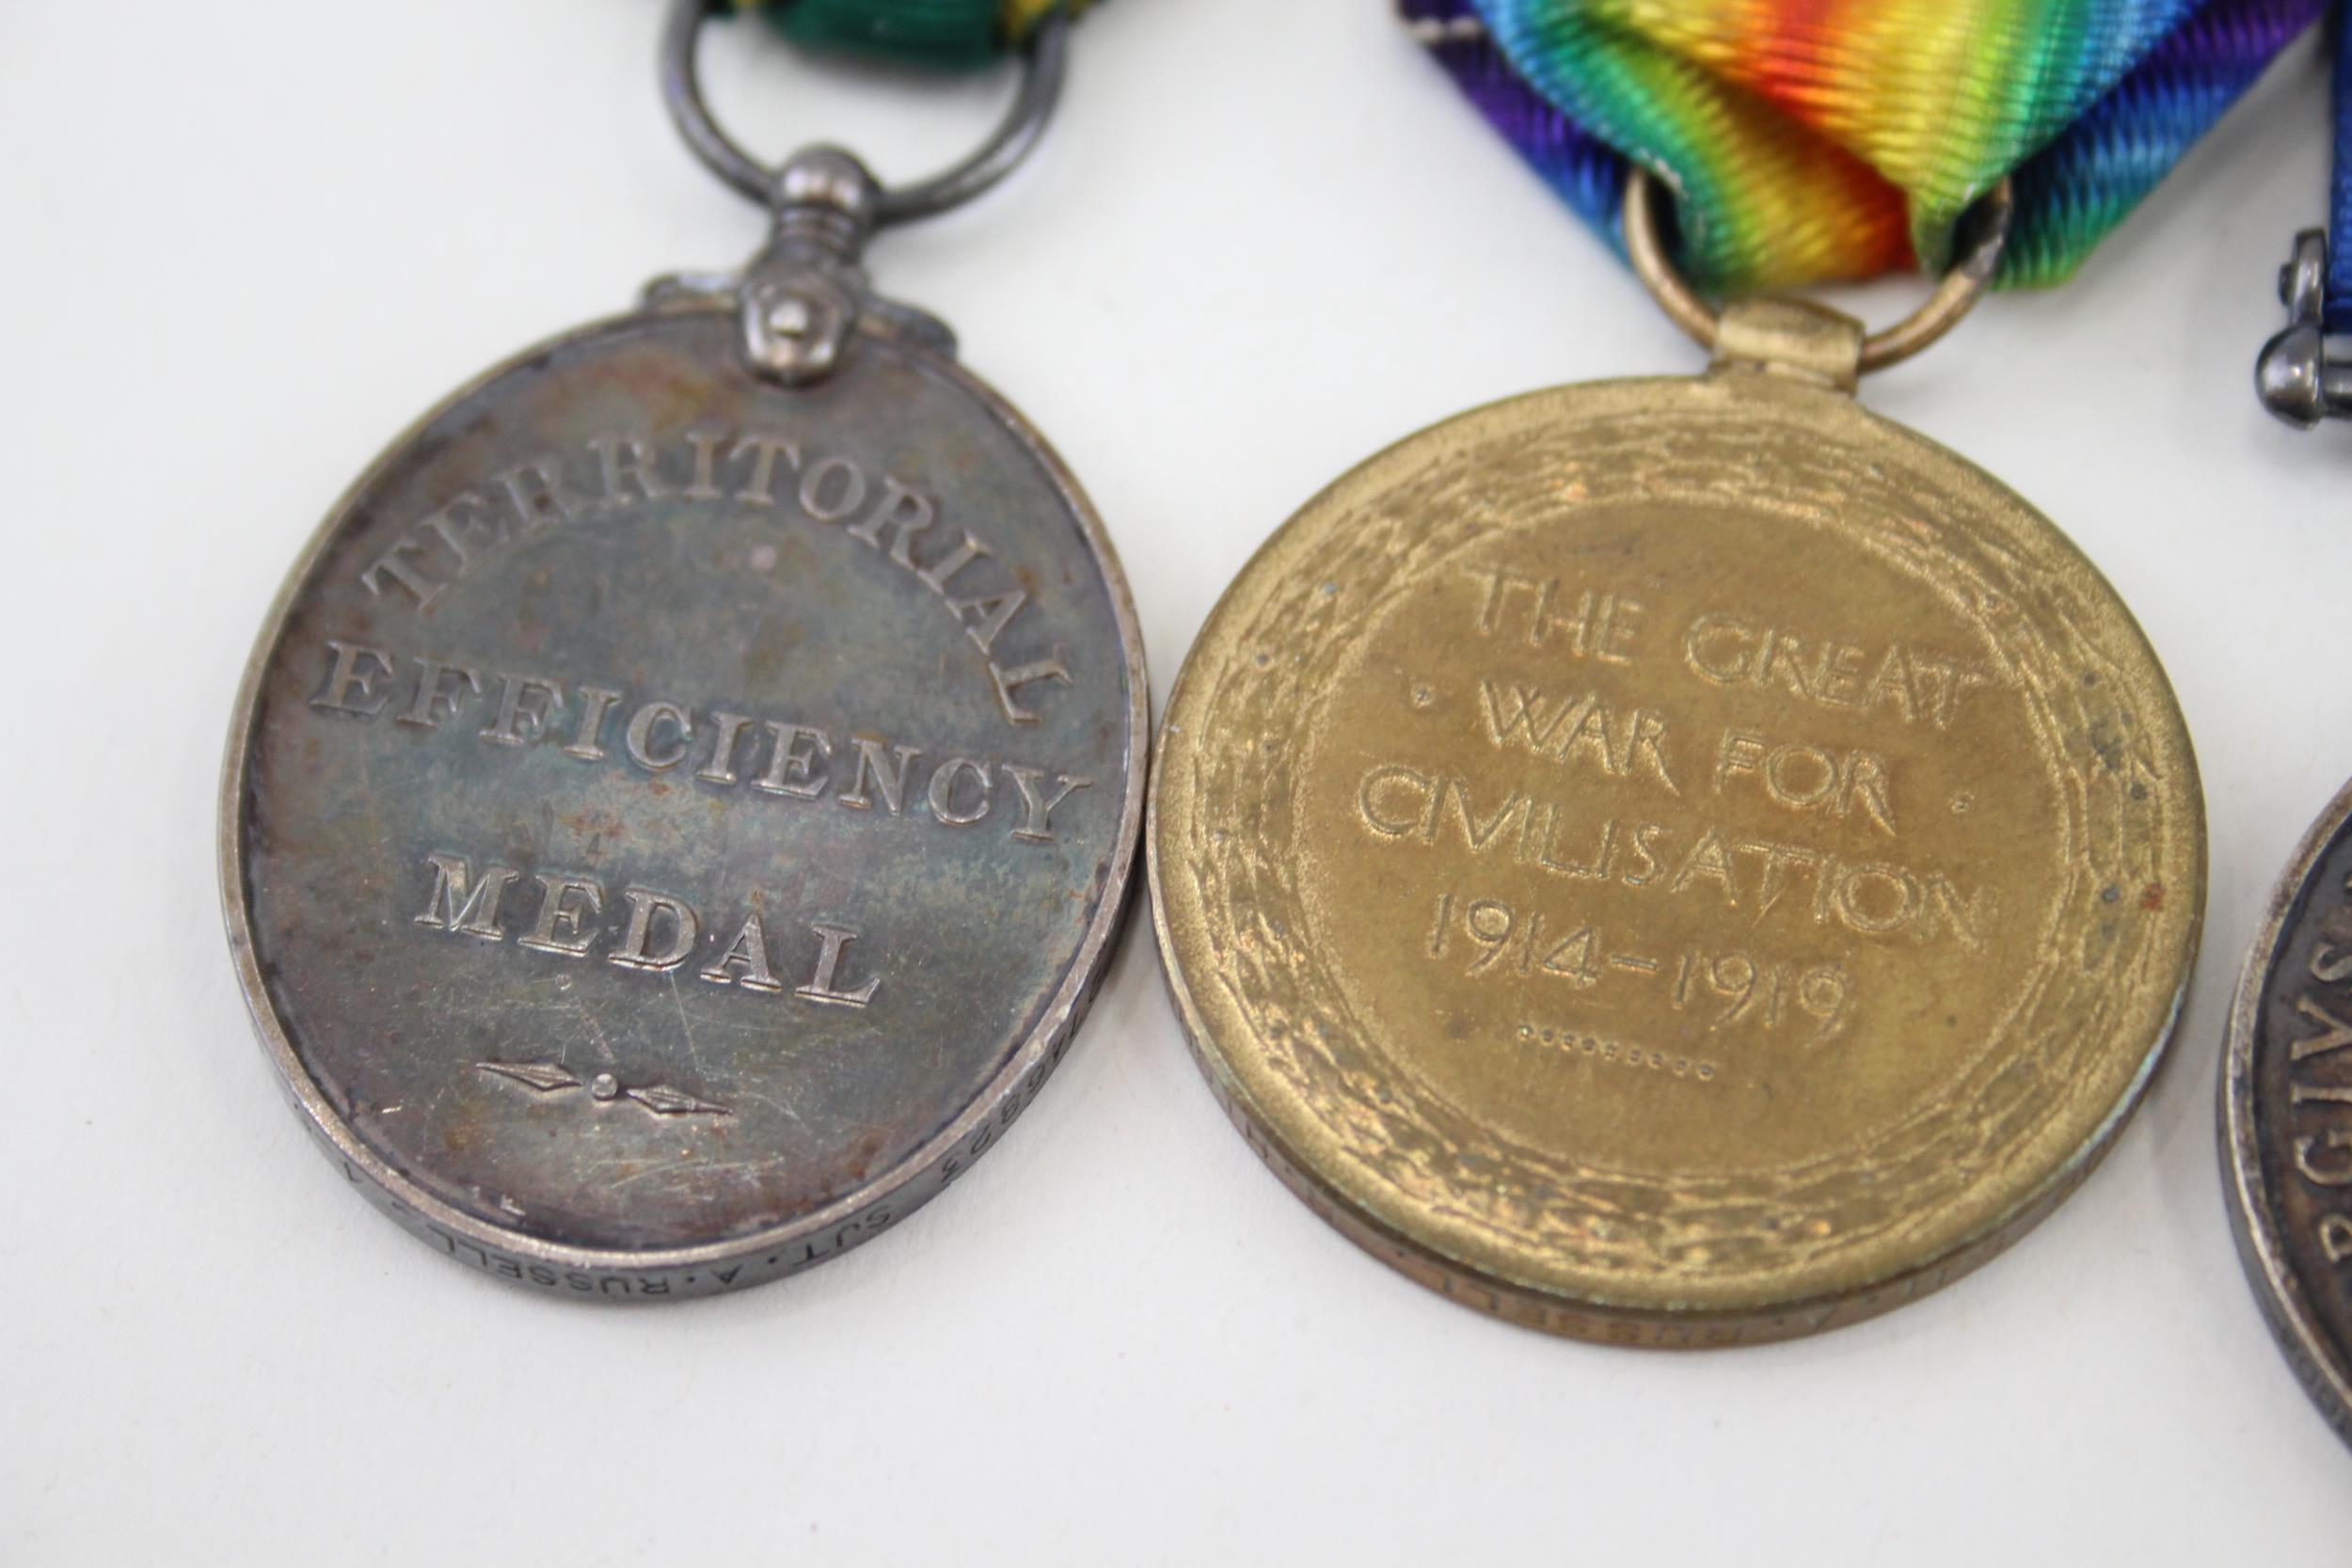 WW1 1914 Mons Star - Territorial Medal Mounted Group - WW1 1914 Mons Star - Territorial Medal - Image 7 of 8